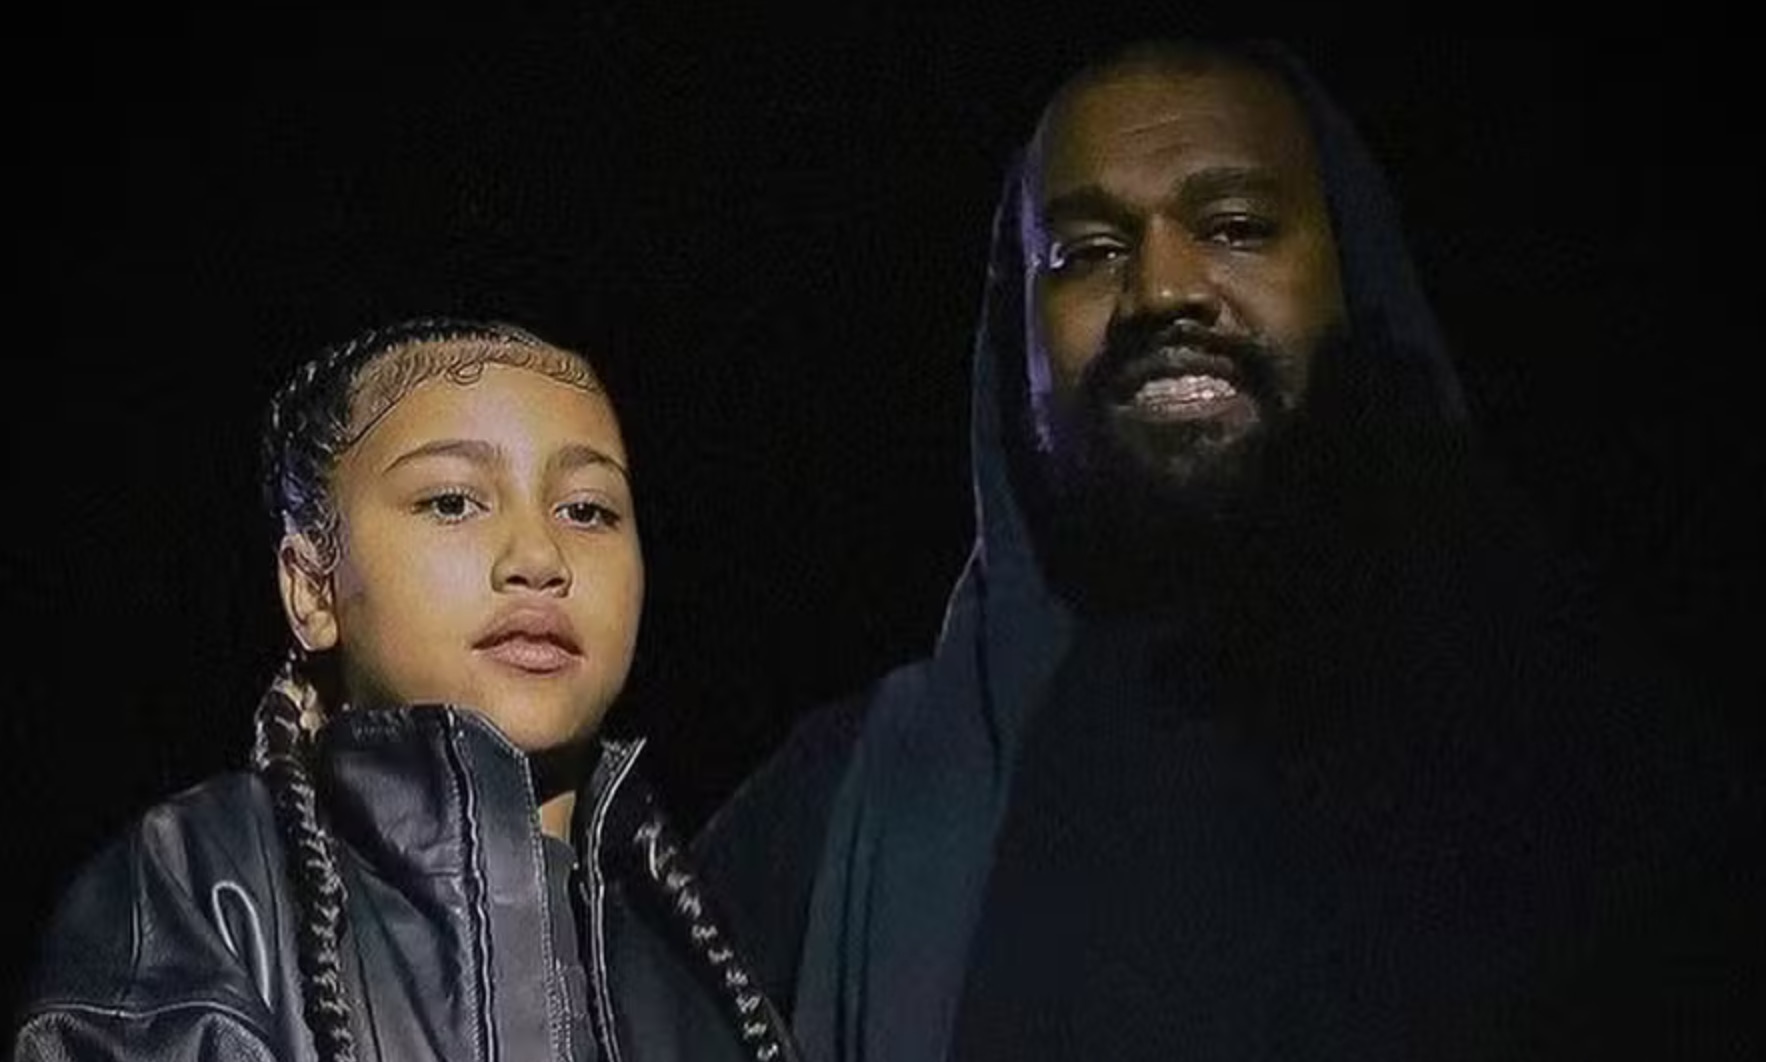 Kanye’s daughter North West announces her debut album